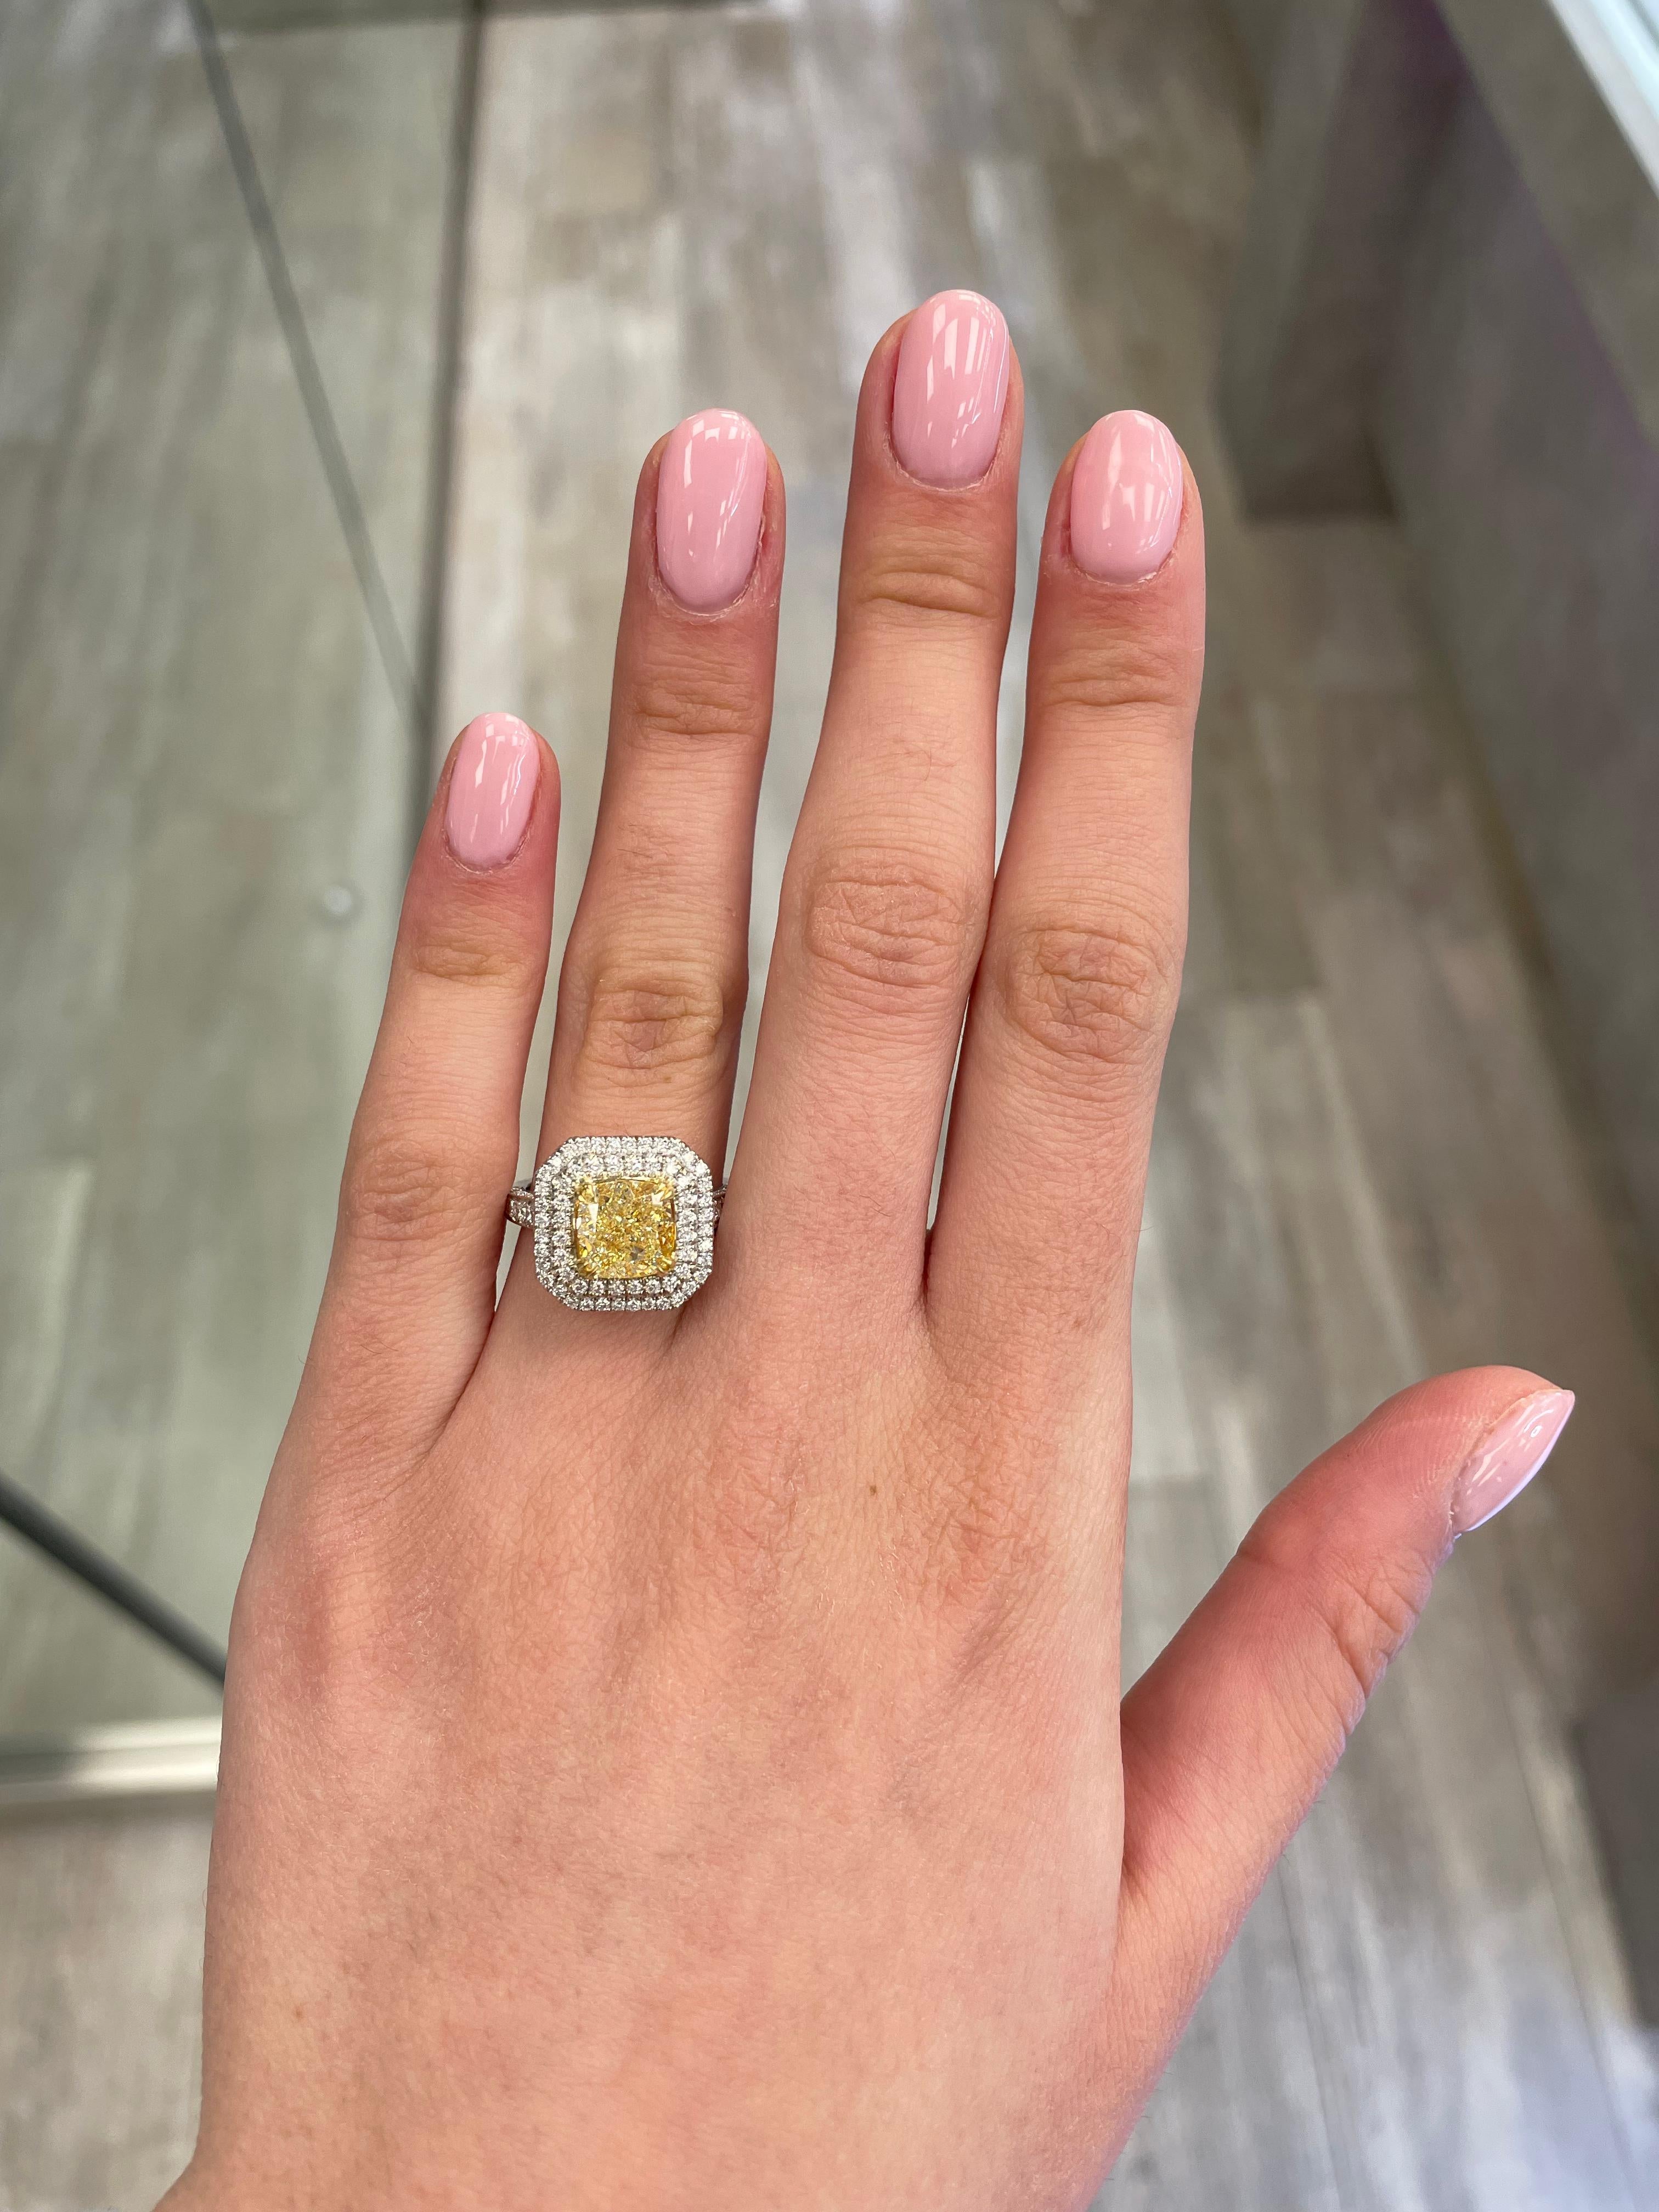 Stunning modern EGL certified yellow diamond double halo ring, two-tone 18k yellow and white gold. By Alexander Beverly Hills
3.69 carats total diamond weight.
2.71 carat cushion cut Fancy Intense Yellow color and VS2 clarity diamond, EGL graded.